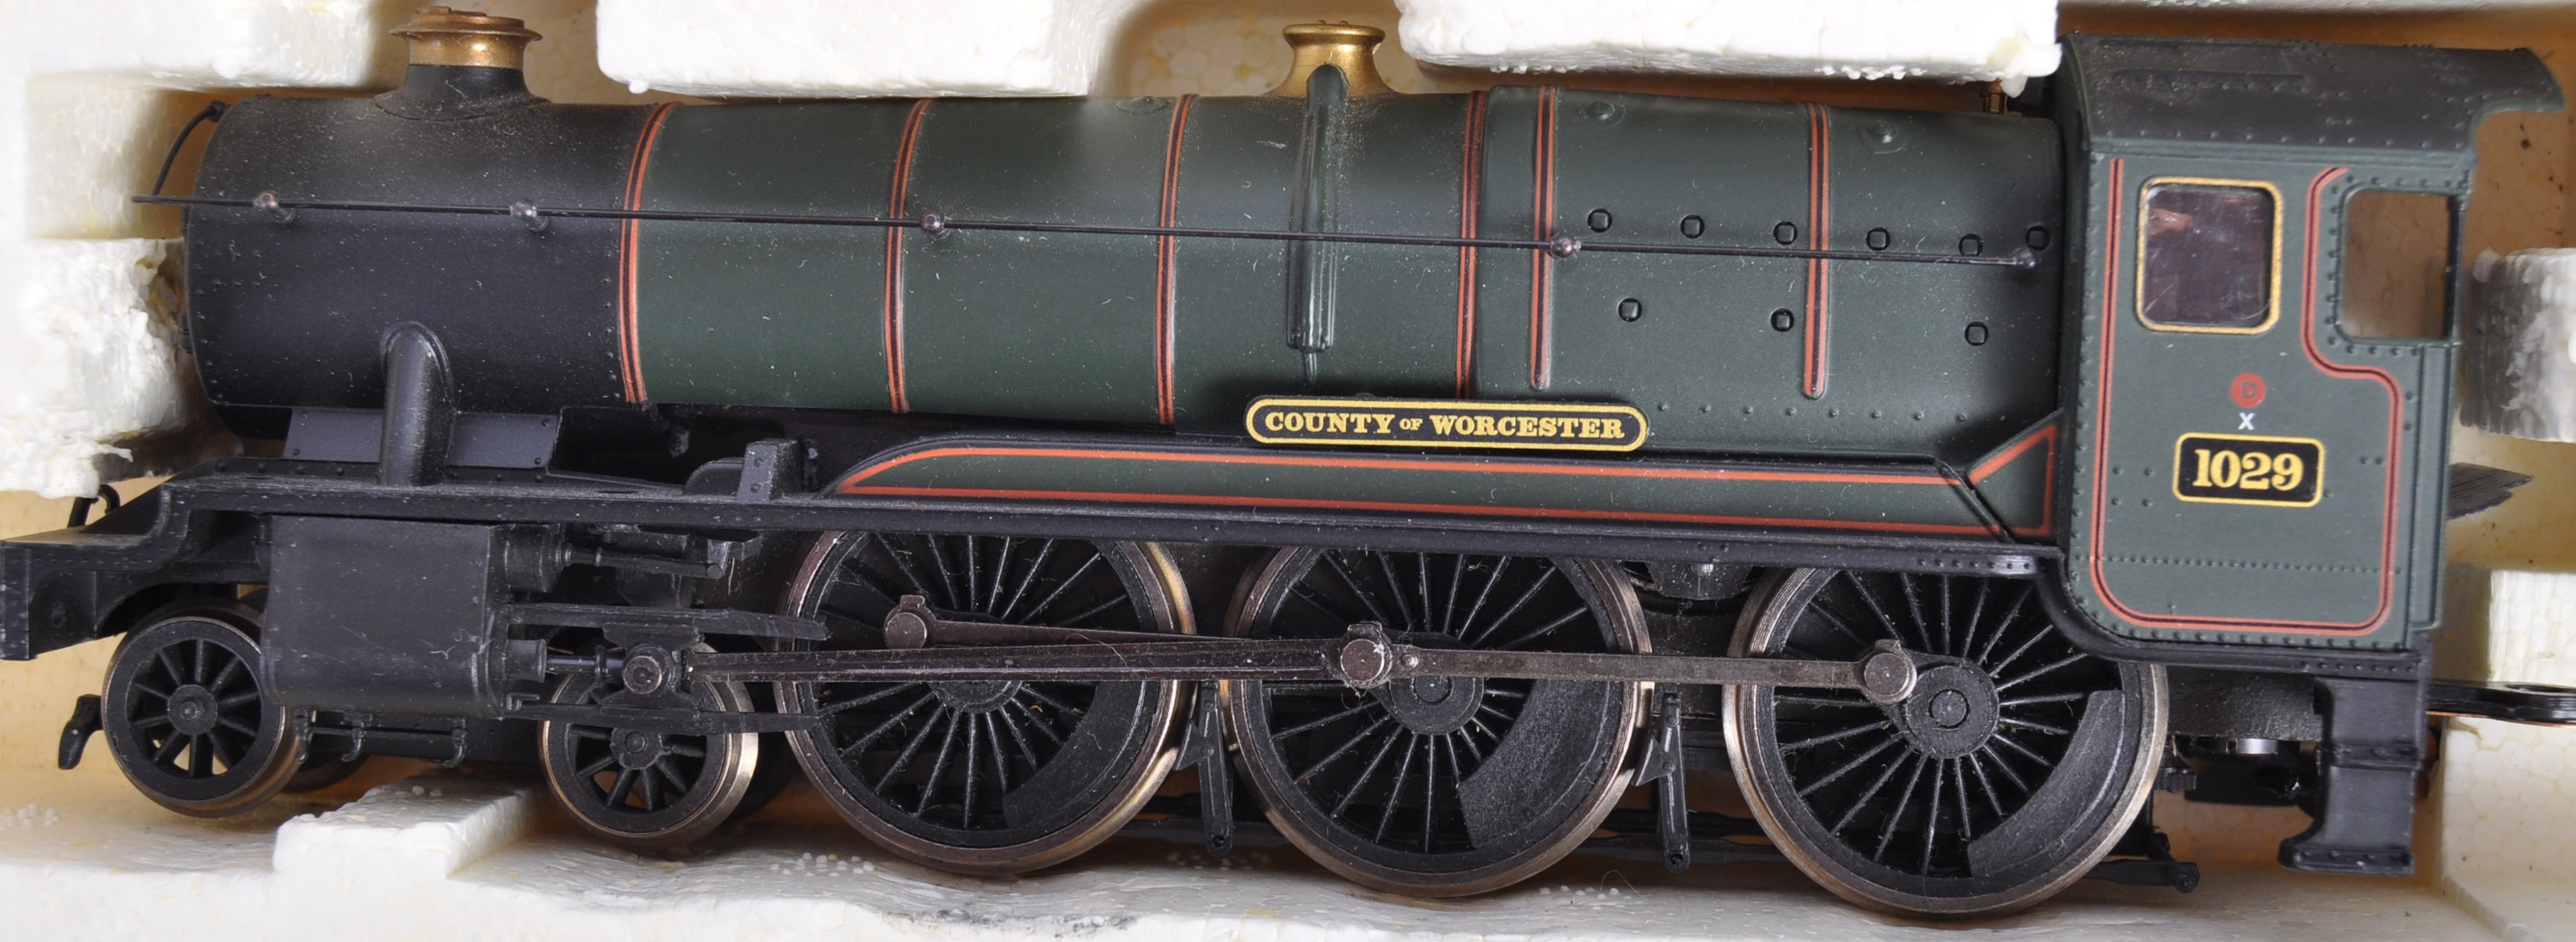 HORNBY 00 GAUGE R2085 ' COUNTY OF WORCESTER ' TRAIN SET LOCO - Image 3 of 4